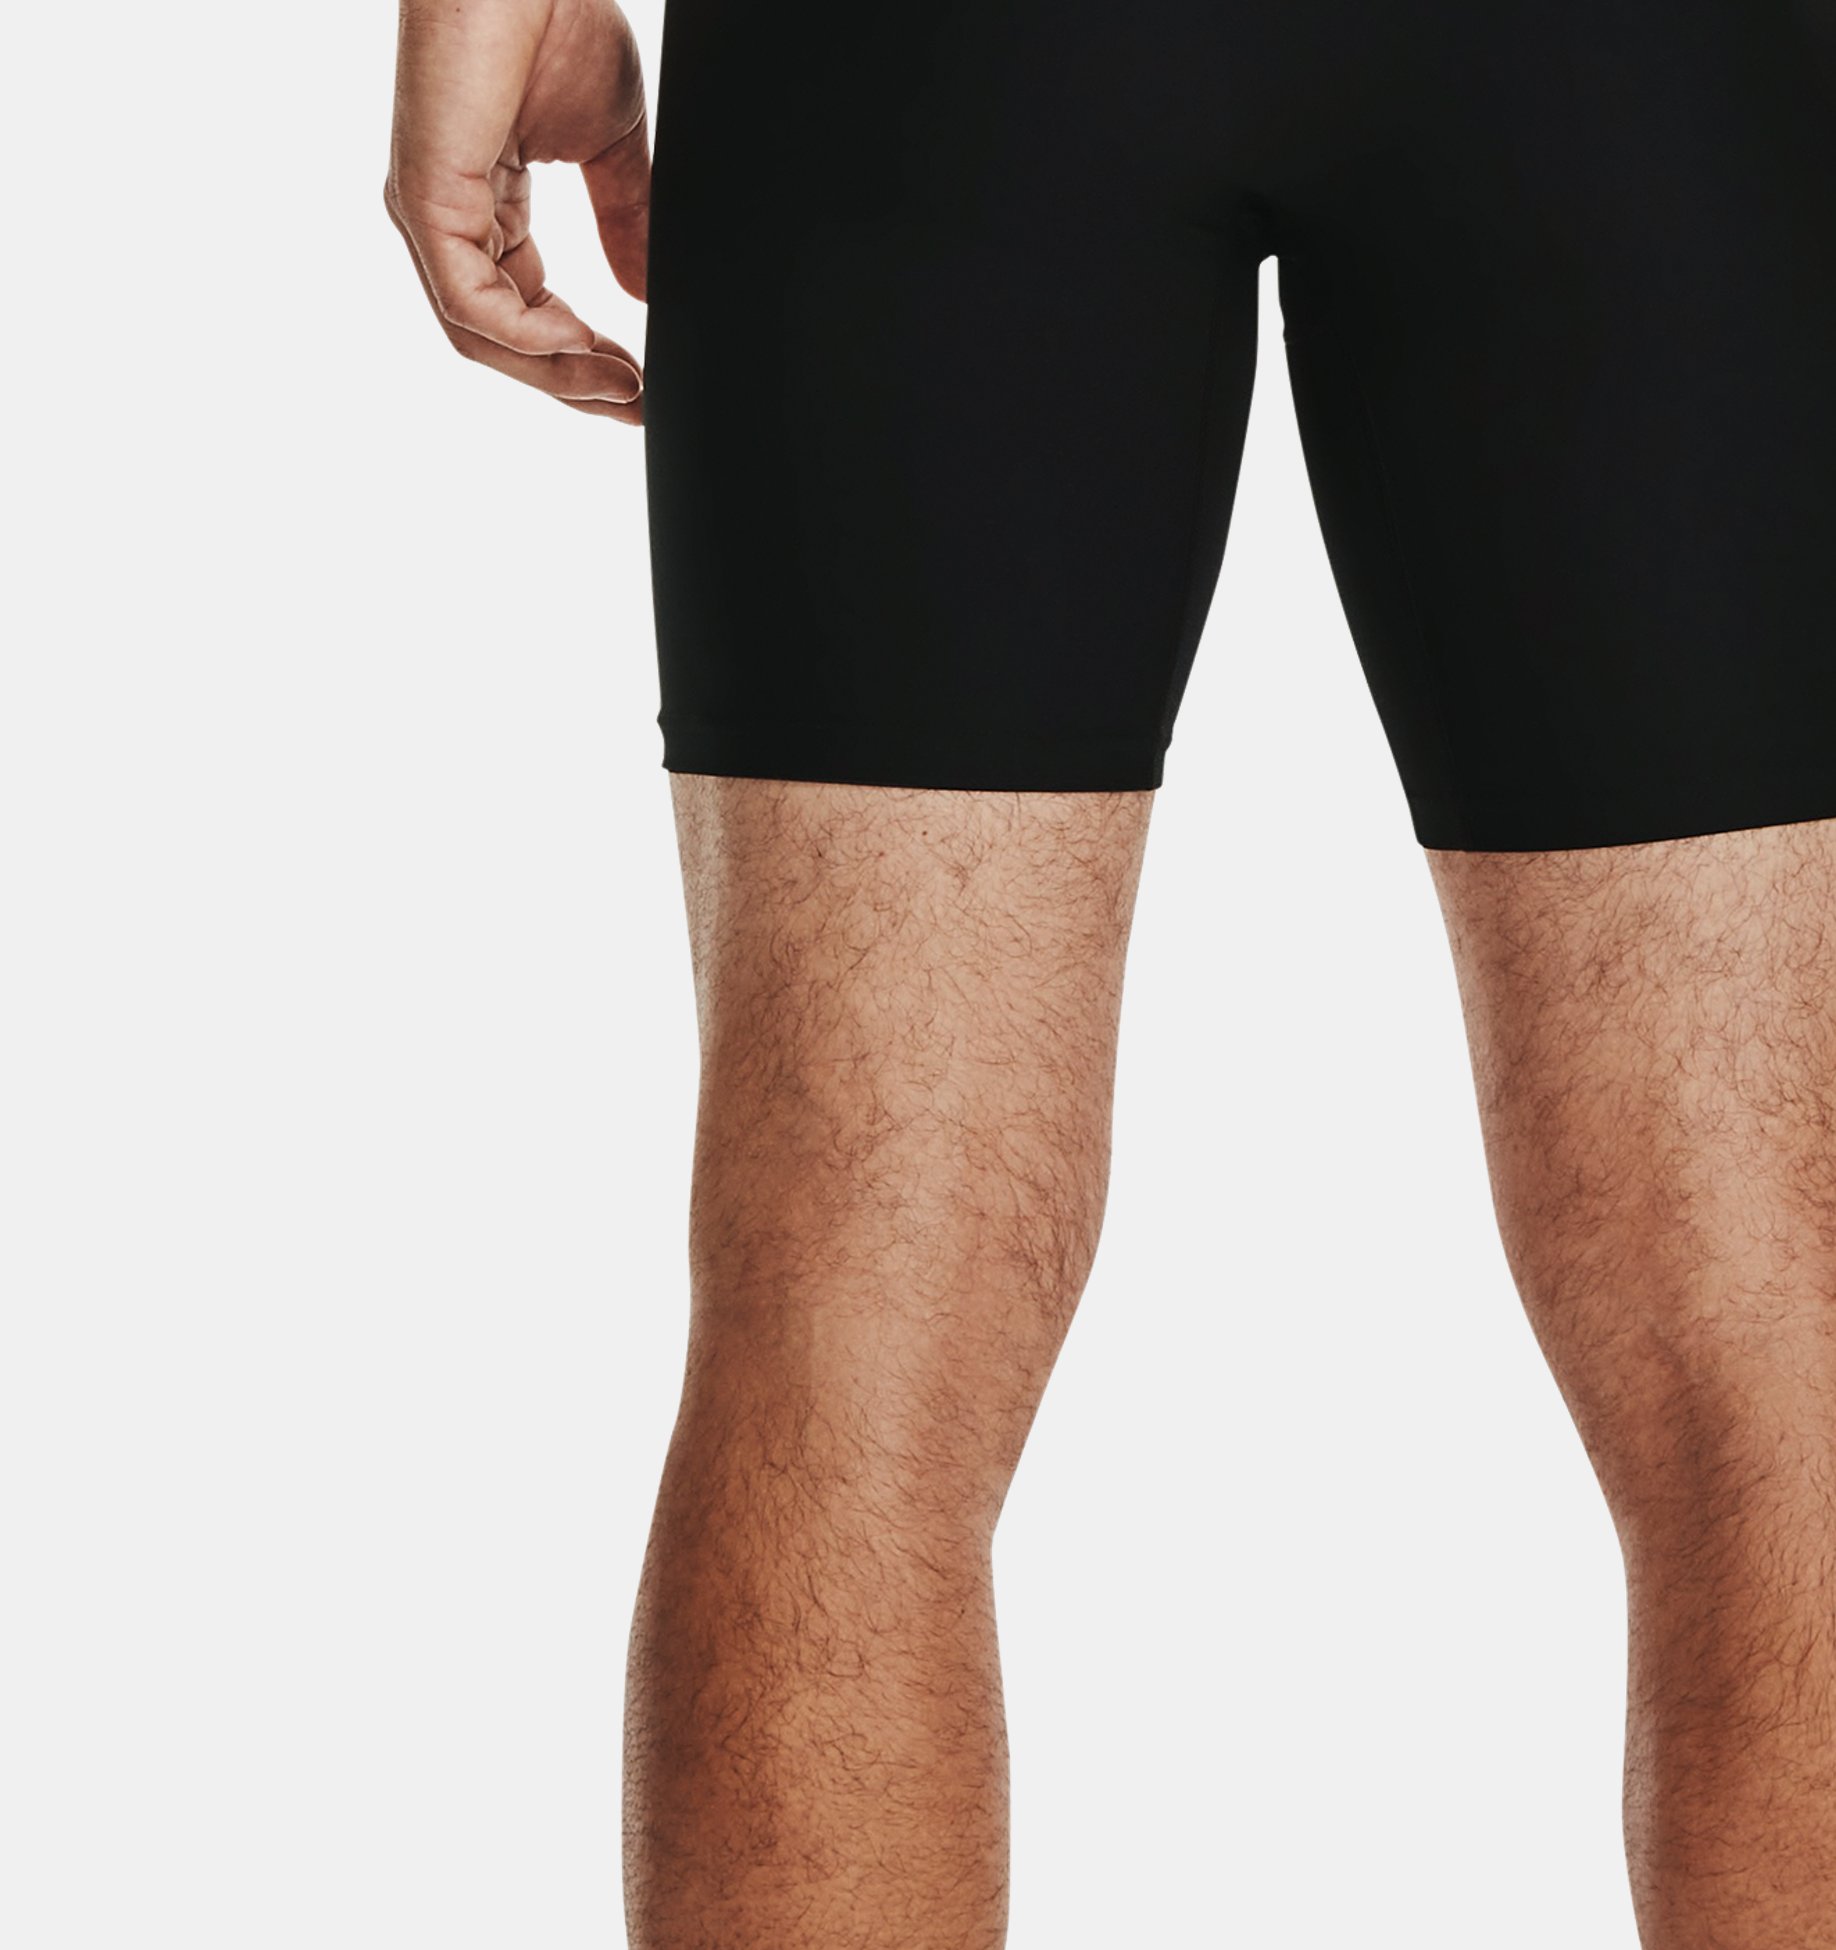 Under Armour Men's HeatGear Compression Shorts - 1361596 - FREE SHIPPING